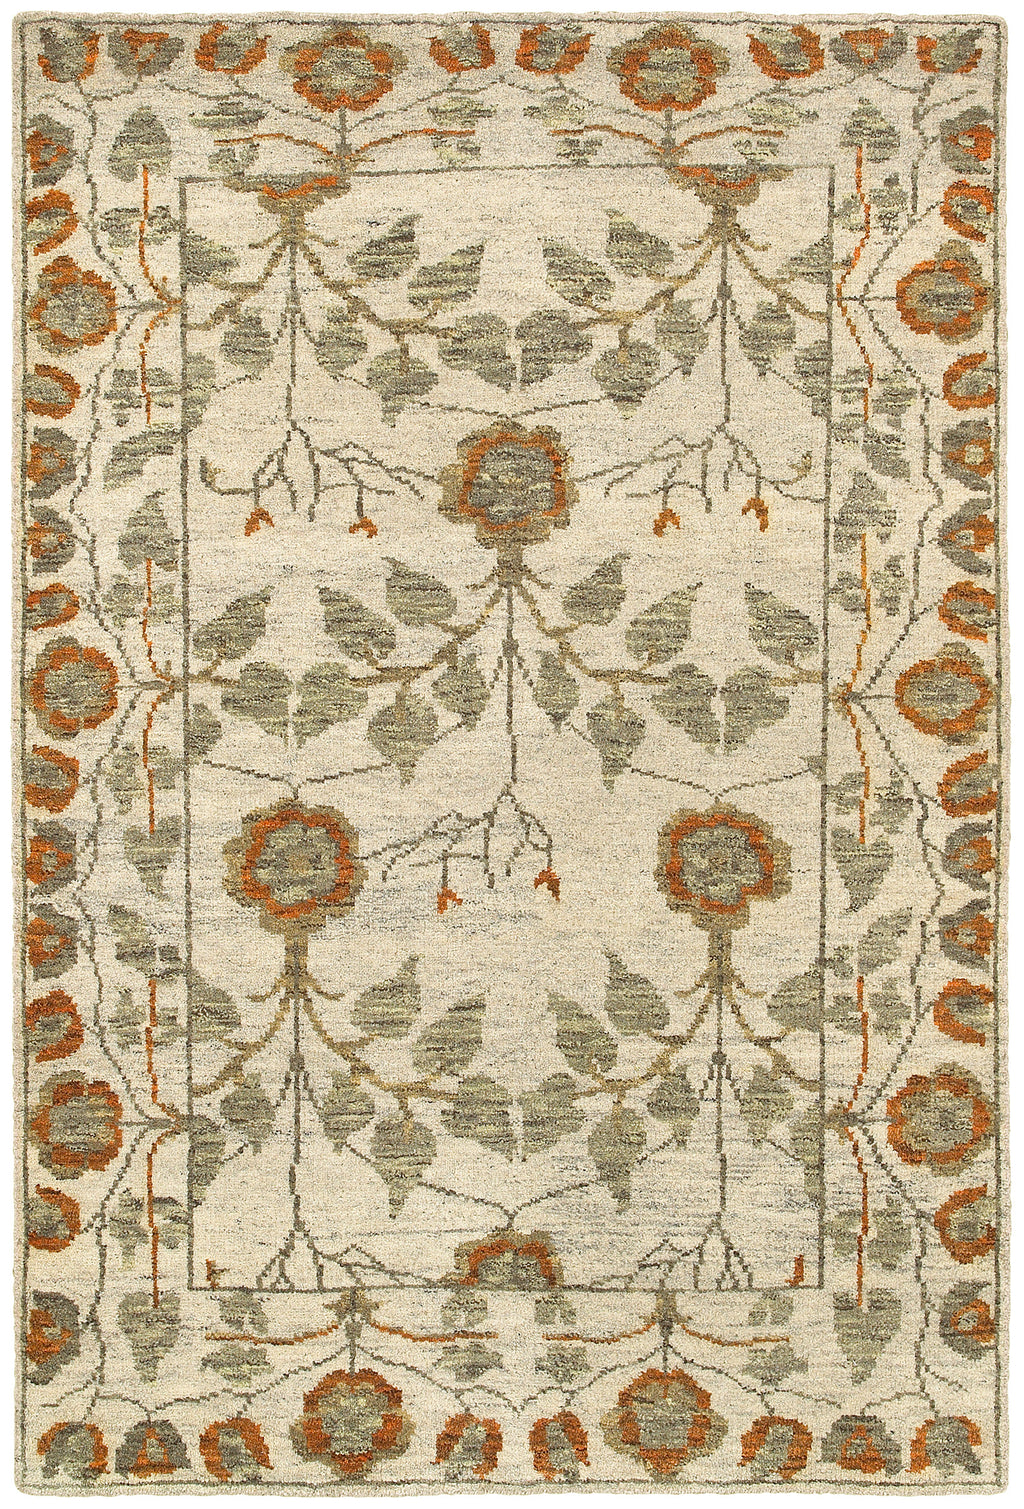 LR Resources Ousha 04422 Natural/Rust Area Rug 4' X 6'